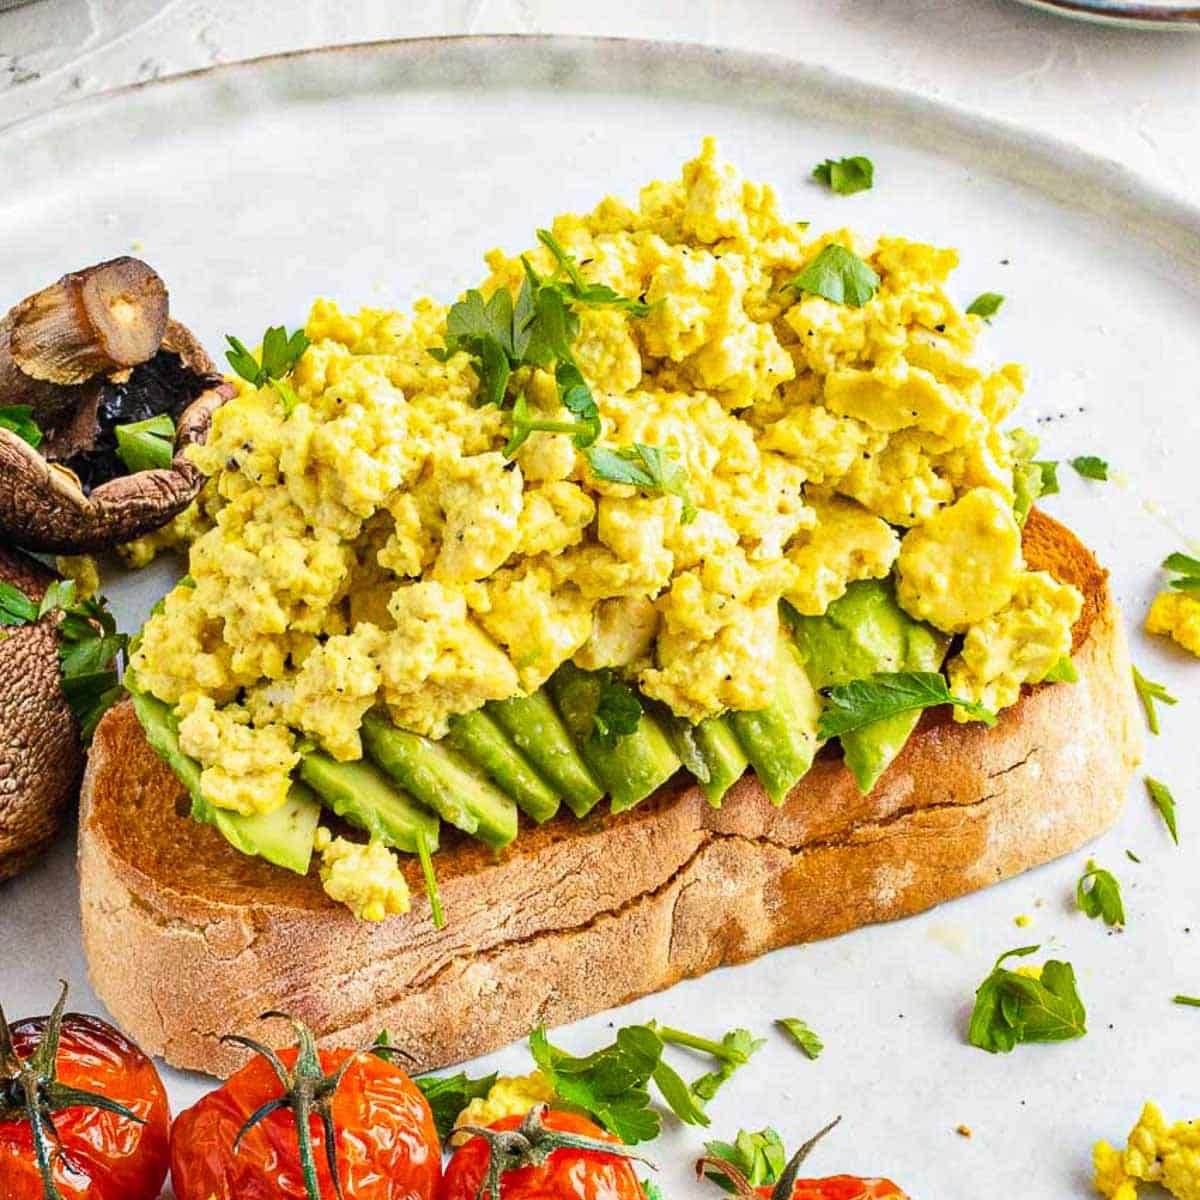 Tofu scramble on bread with vegetables